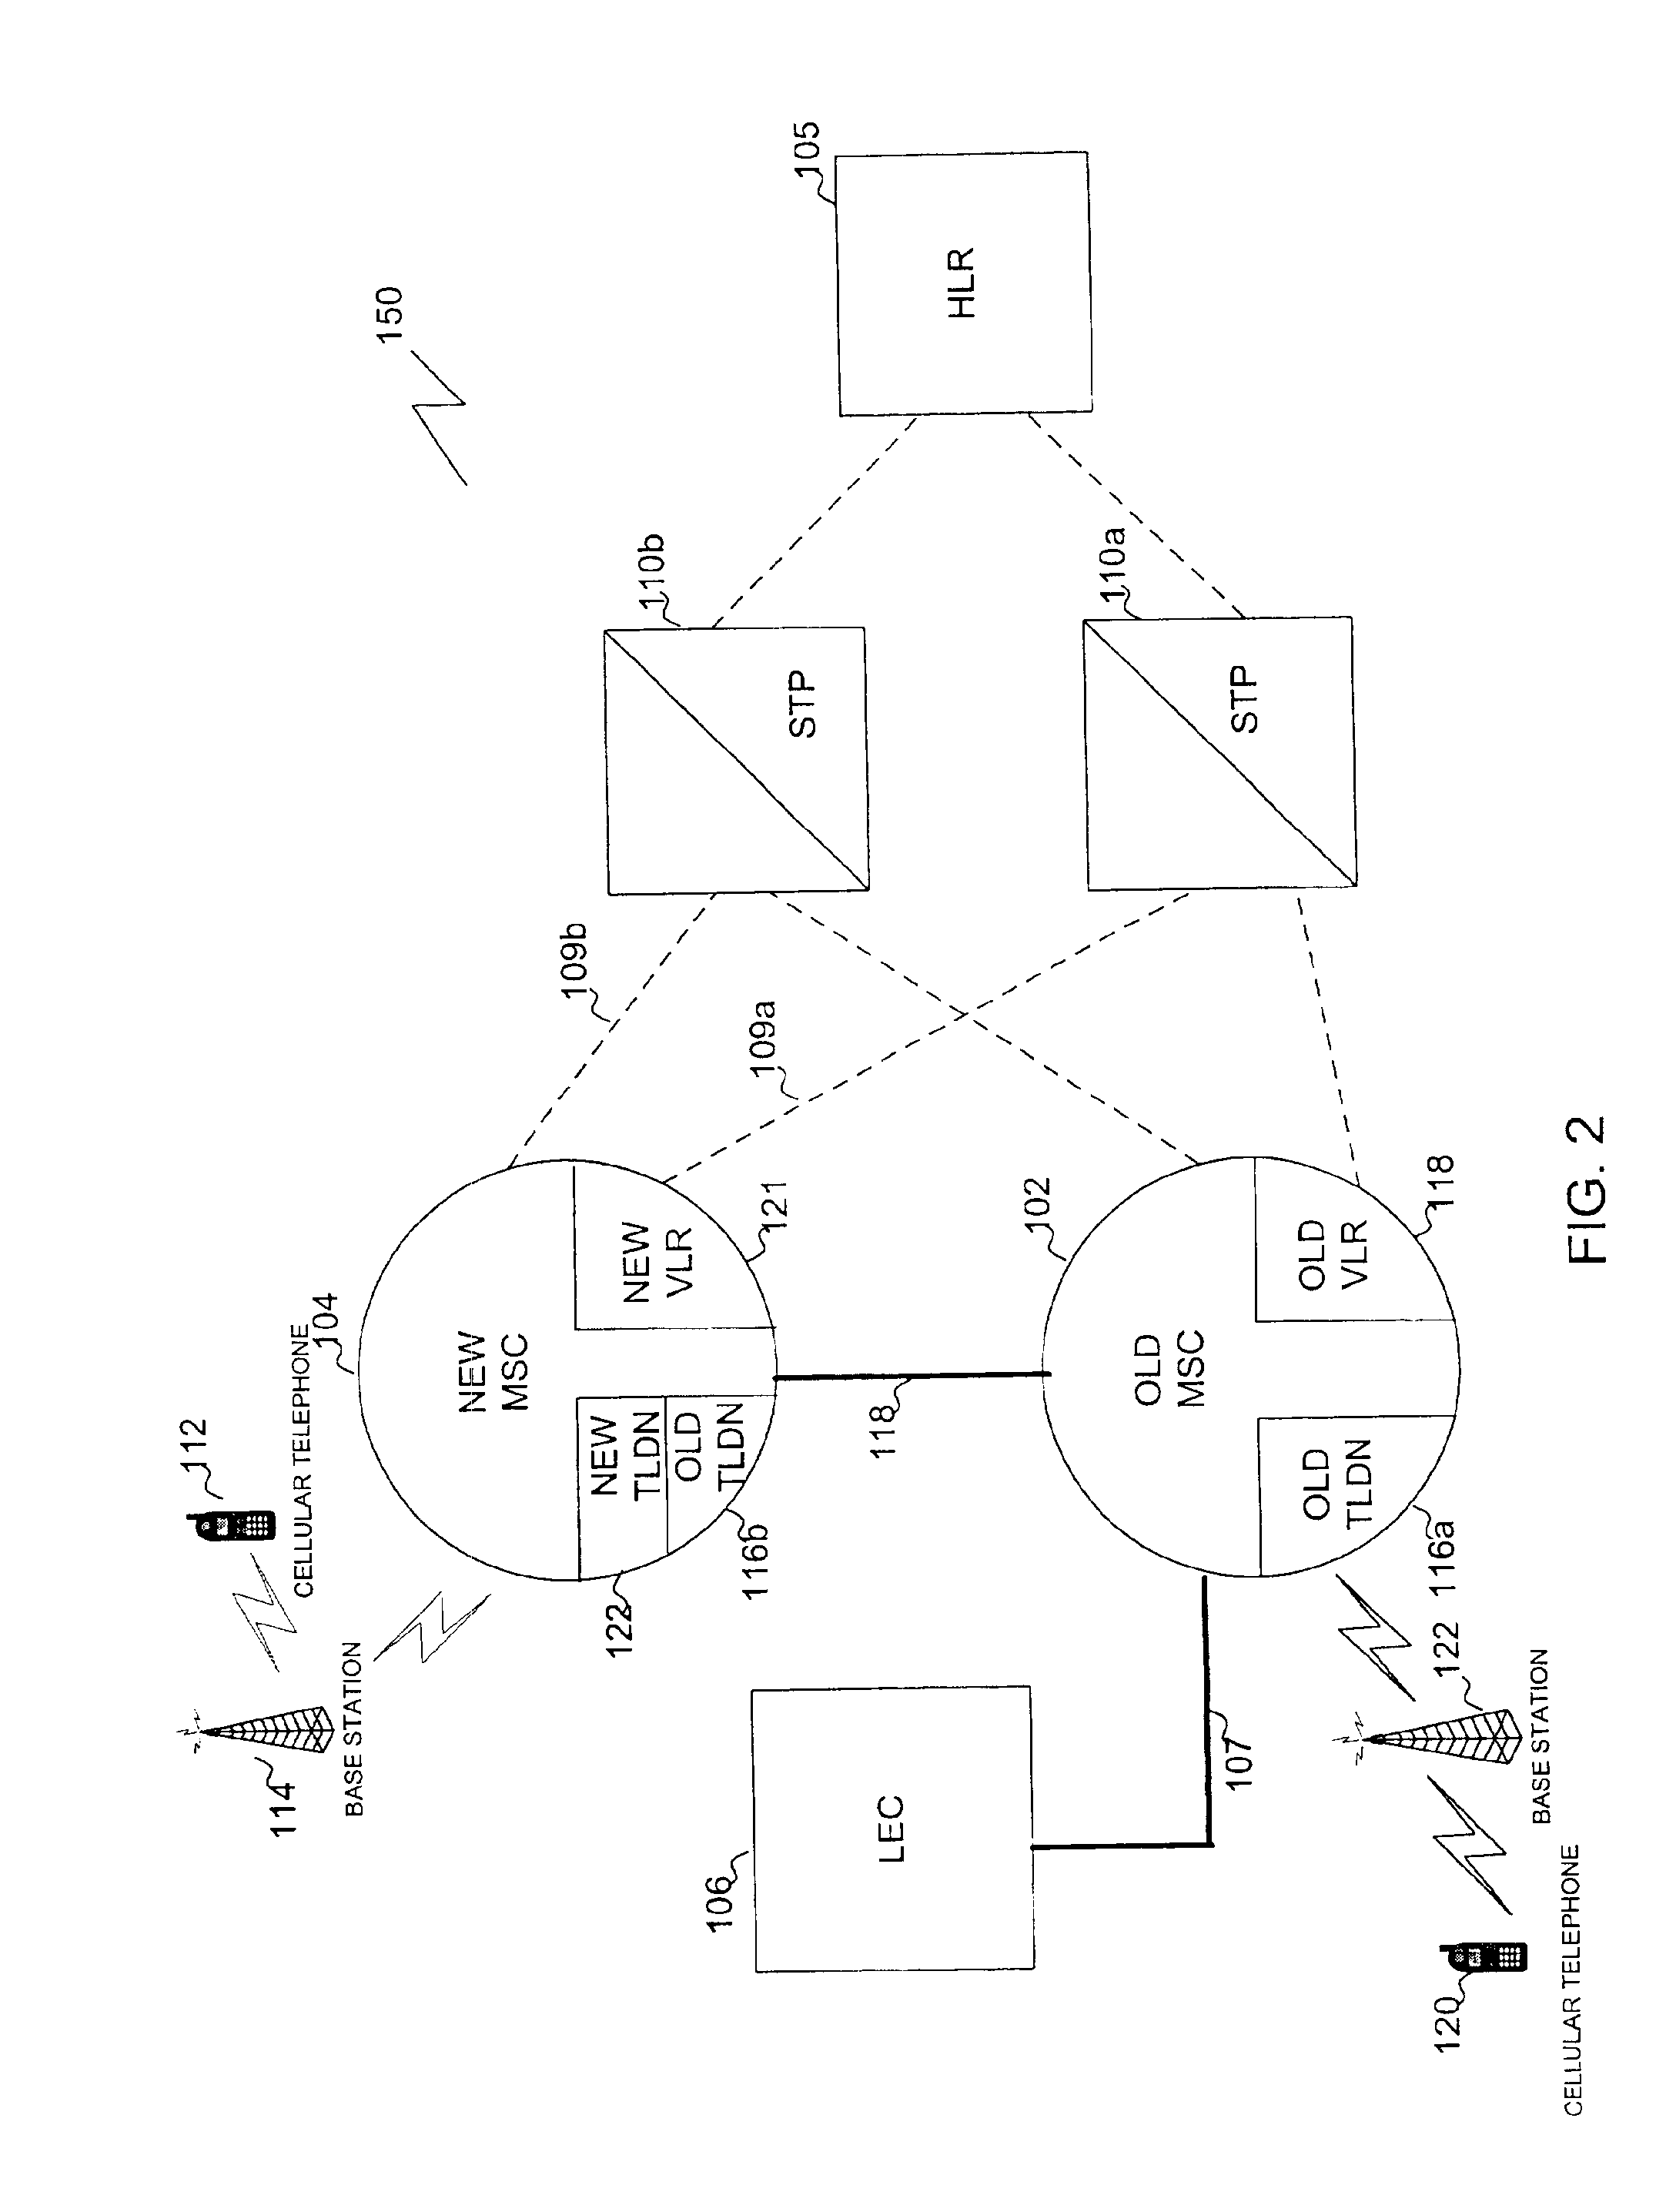 System and method for providing cellular telephone service during cluster testing